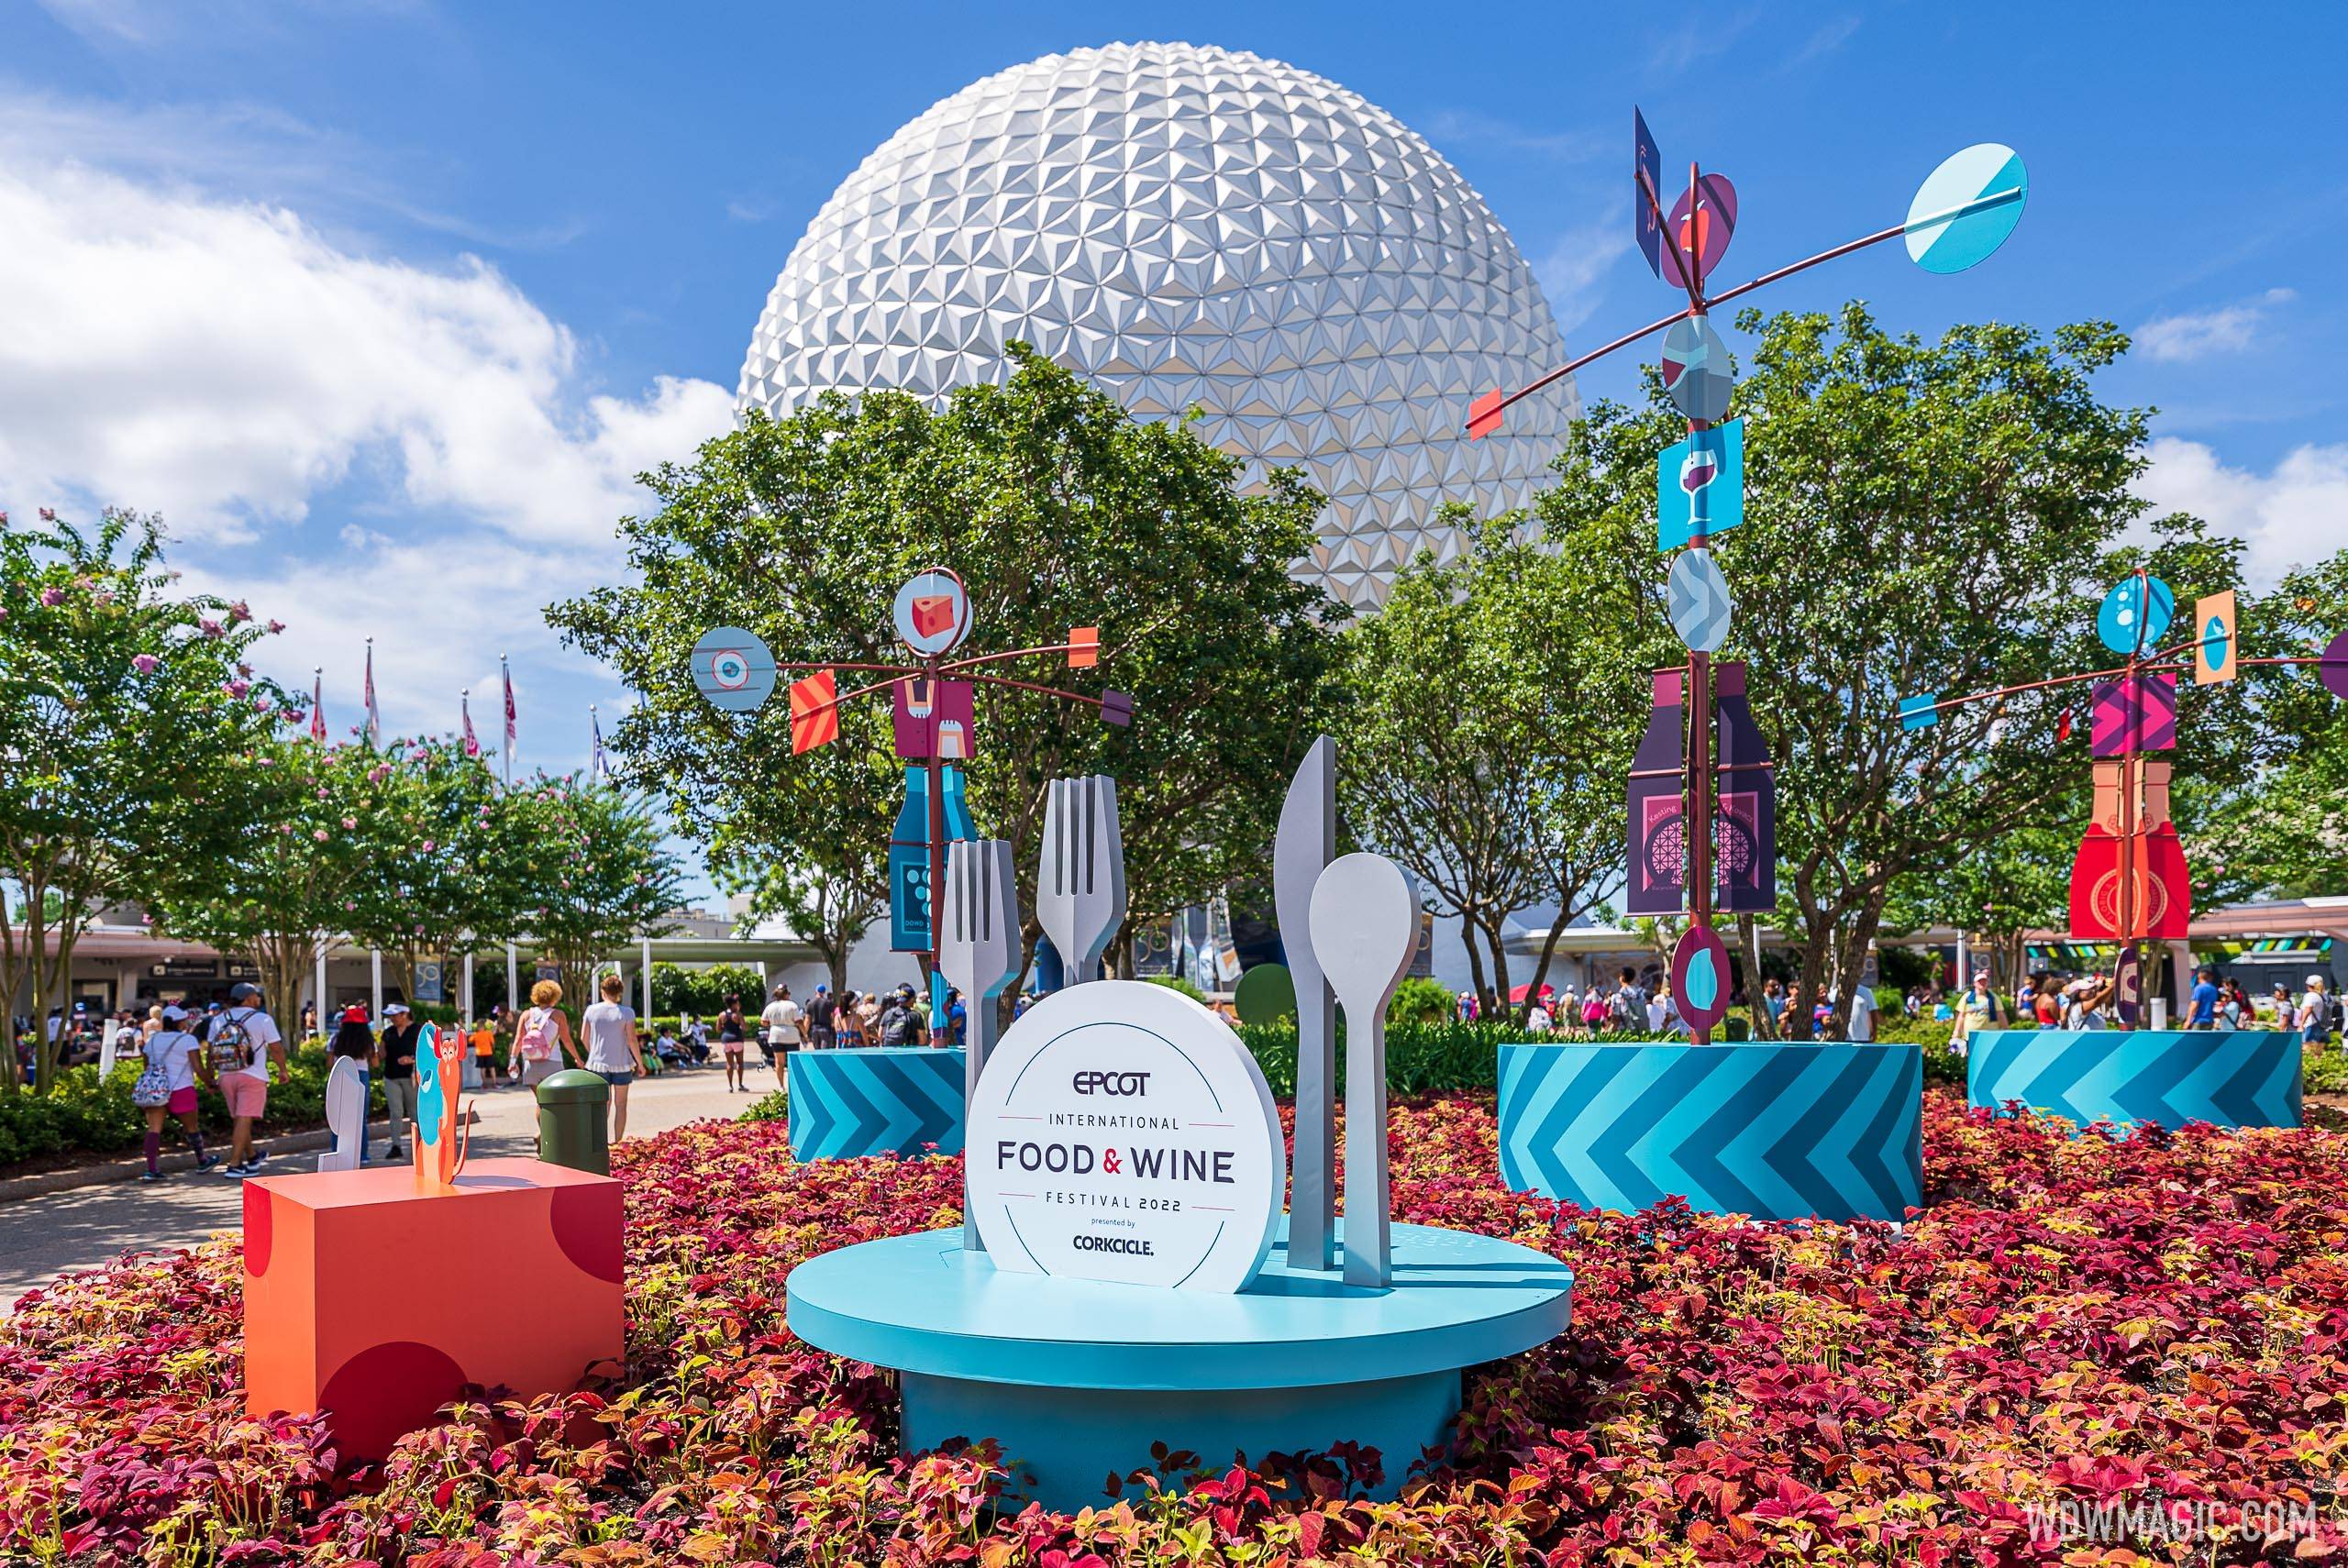 Opening day at the 2022 EPCOT International Food and Wine Festival